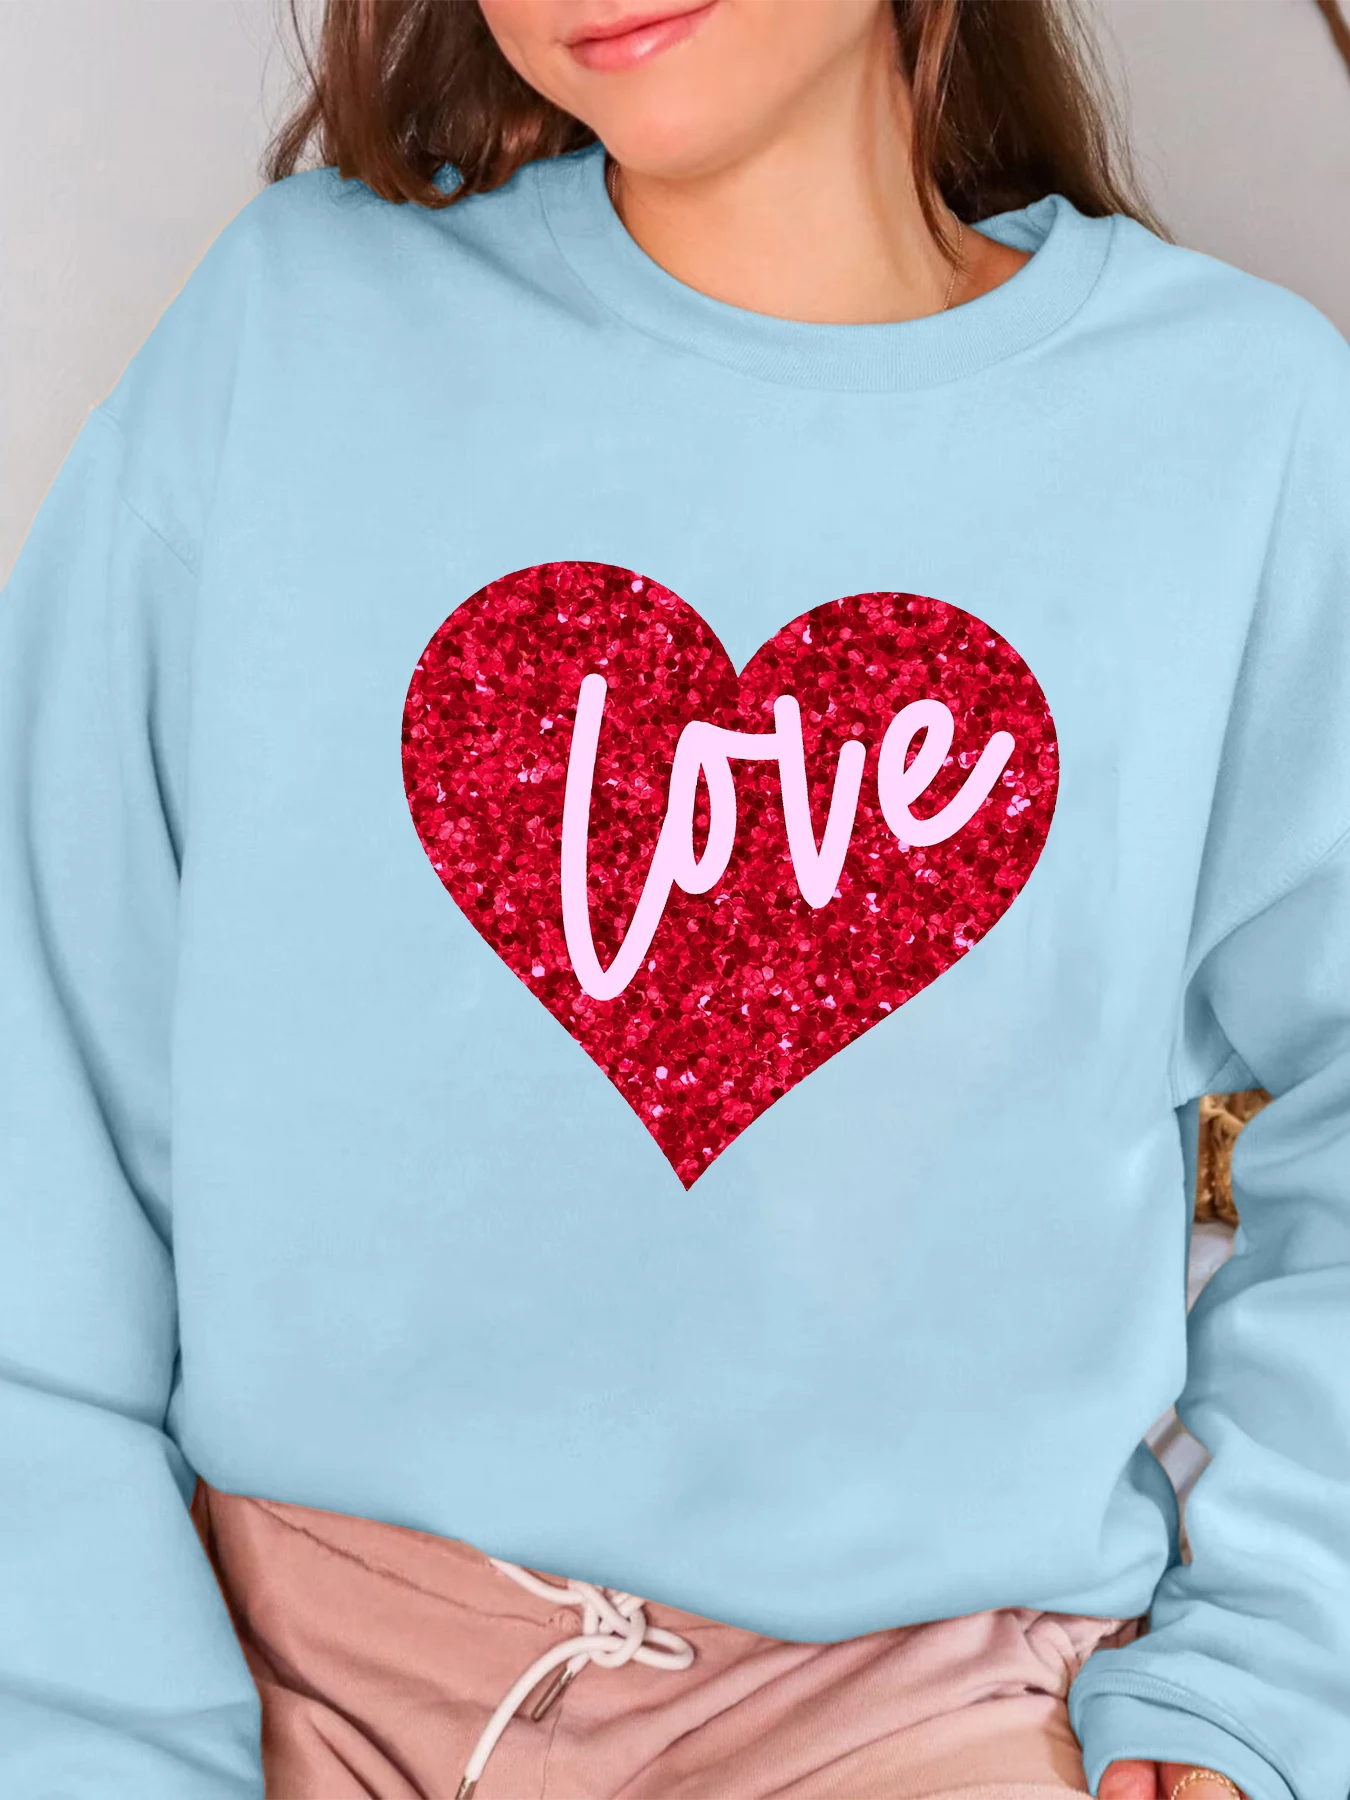 Lovely Spring Woman Sweatshirt Red Heart Graphic Print Fashion Casual Comfort Long Sleeve  Pullover for Holiday Outfits